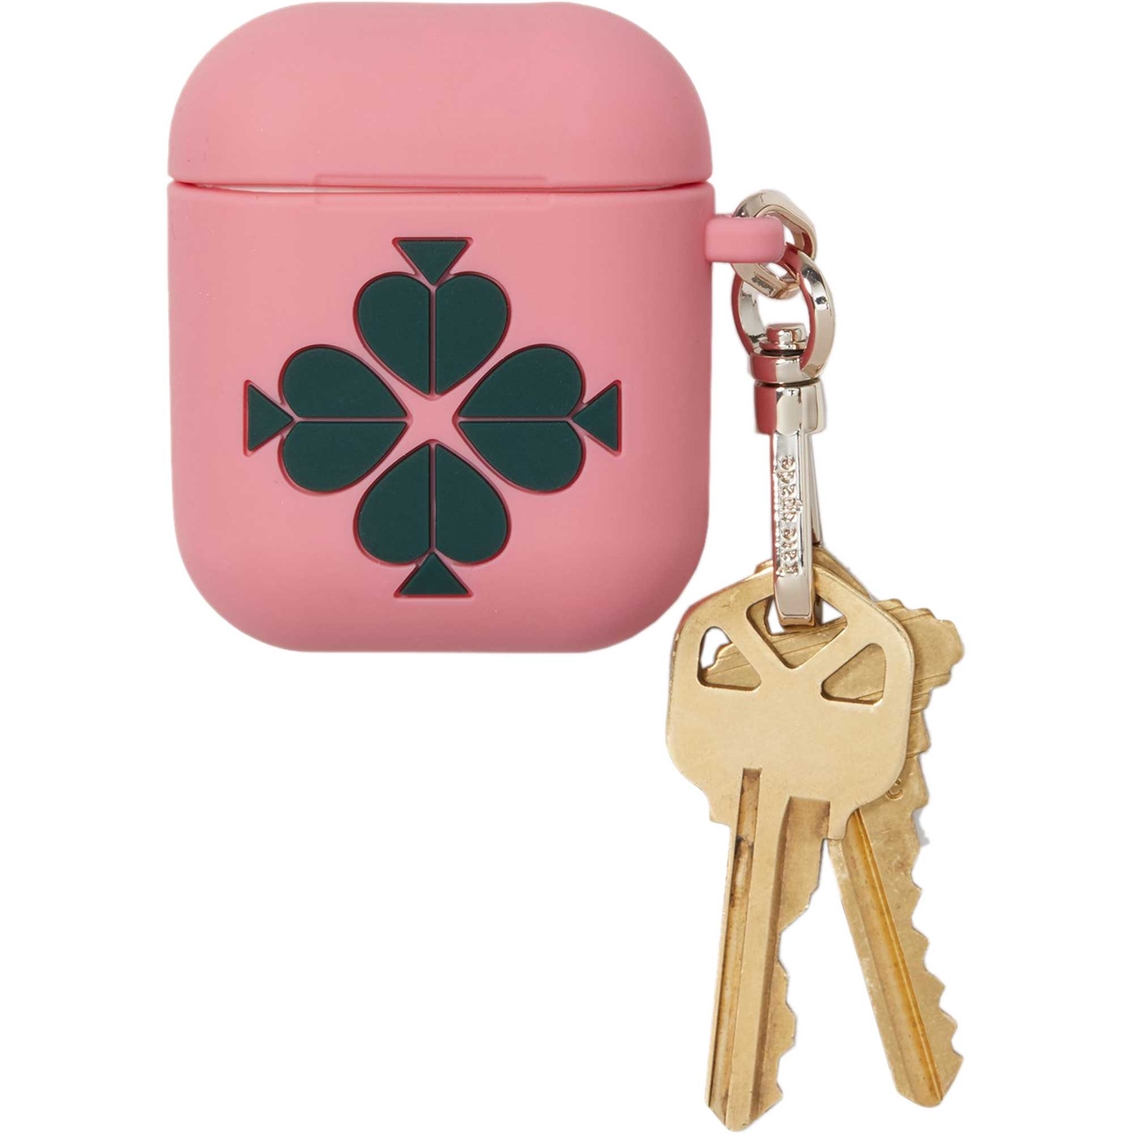 Kate Spade New York Airpod Case - Image 4 of 4